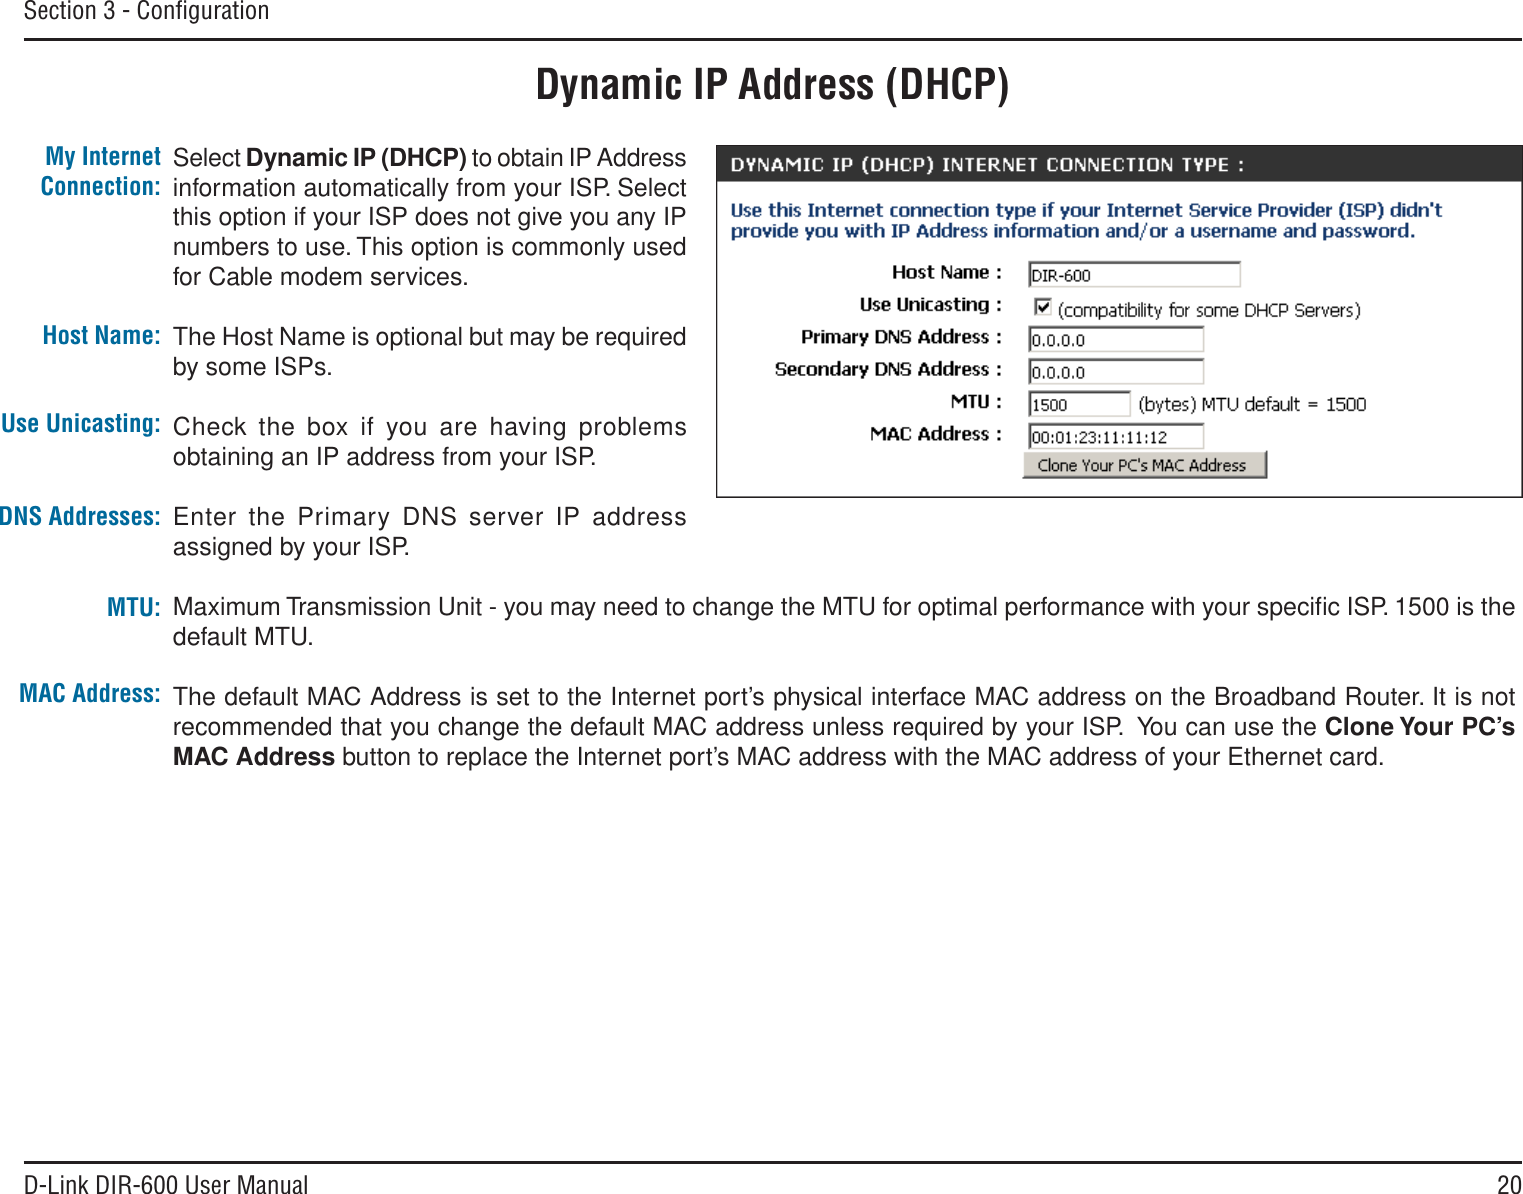 20D-Link DIR-600 User ManualSection 3 - ConﬁgurationDynamic IP Address (DHCP)Select Dynamic IP (DHCP) to obtain IP Address information automatically from your ISP. Select this option if your ISP does not give you any IP numbers to use. This option is commonly used for Cable modem services.The Host Name is optional but may be required by some ISPs. Check the box if you are having problems obtaining an IP address from your ISP.Enter the Primary DNS server IP address assigned by your ISP.Maximum Transmission Unit - you may need to change the MTU for optimal performance with your speciﬁc ISP. 1500 is the default MTU.The default MAC Address is set to the Internet port’s physical interface MAC address on the Broadband Router. It is not recommended that you change the default MAC address unless required by your ISP.  You can use the Clone Your PC’sMAC Address button to replace the Internet port’s MAC address with the MAC address of your Ethernet card.My Internet Connection:Host Name:MAC Address:DNS Addresses:MTU:Use Unicasting: